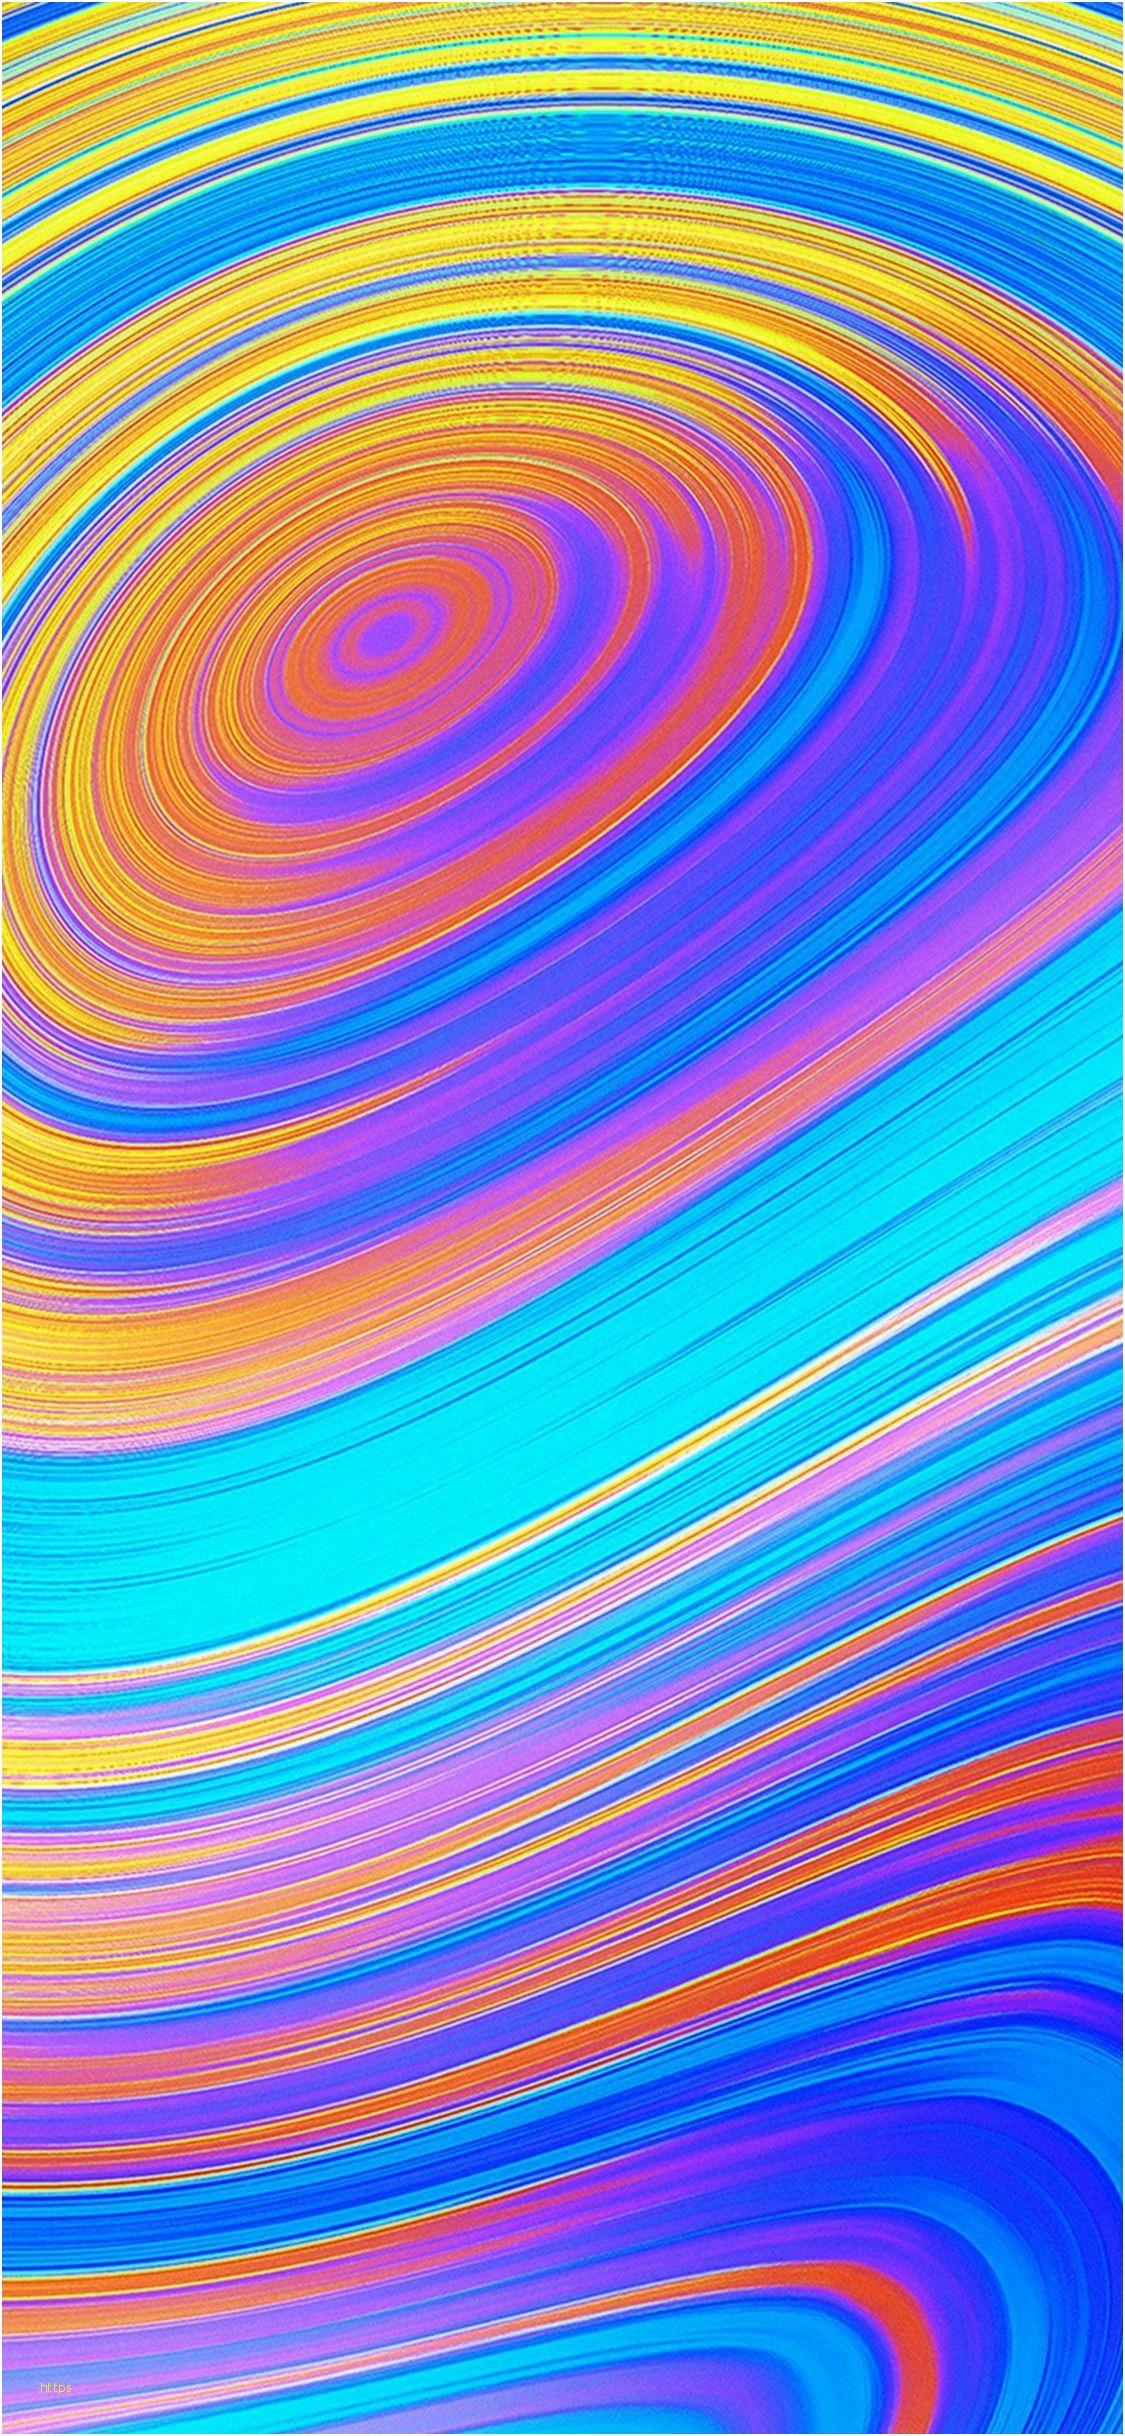 Cool Mac Wallpapers Unique Iphone X Wallpapers For Mac